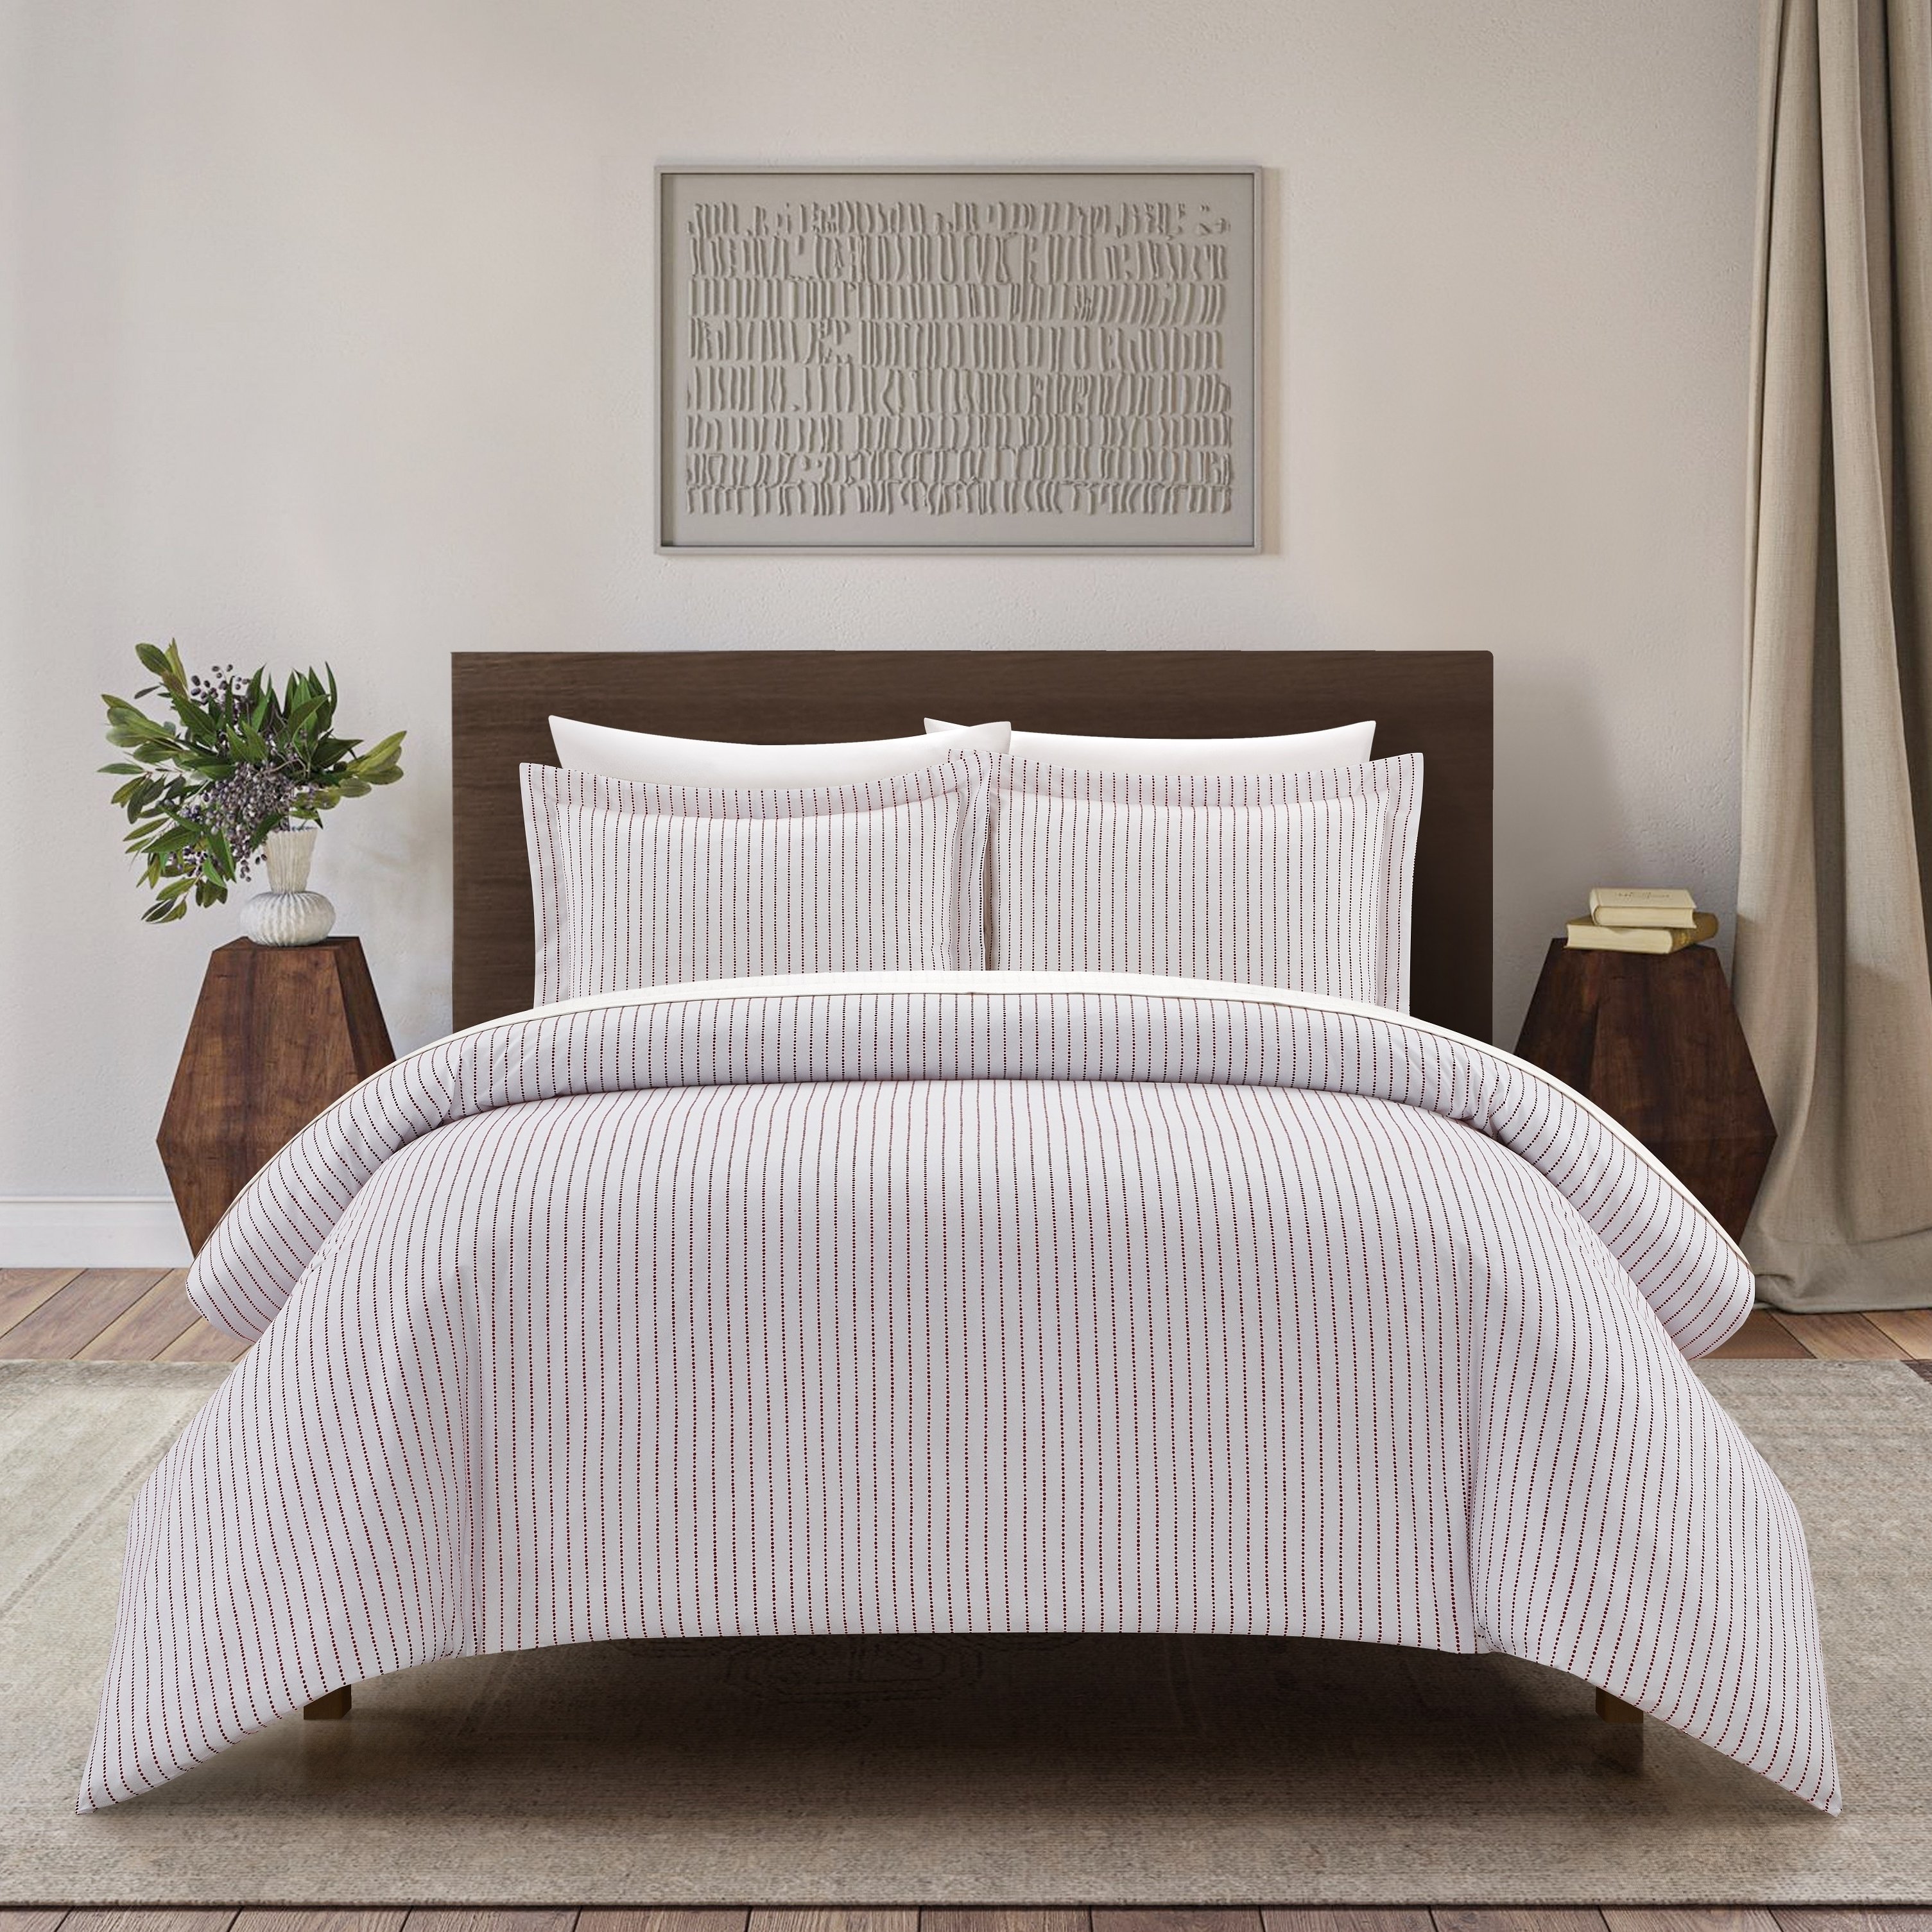 Vasey 2 Or 3 Piece Duvet Cover Set Contemporary Solid White With Dot Striped - Dark Purple, King